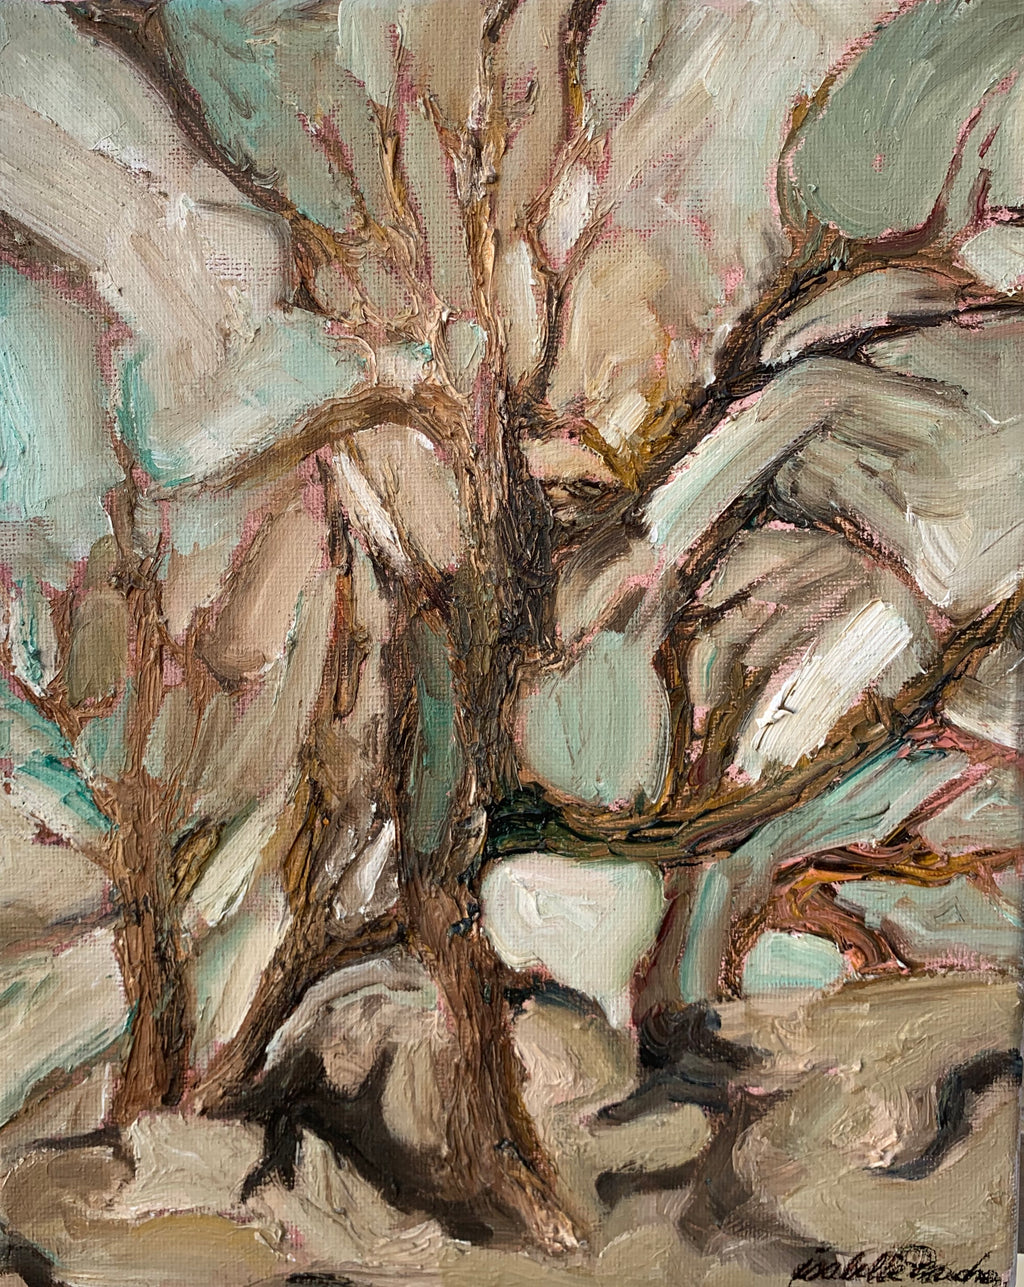 Highly textured study of little cypress in the high desert of the Grand Canyon.